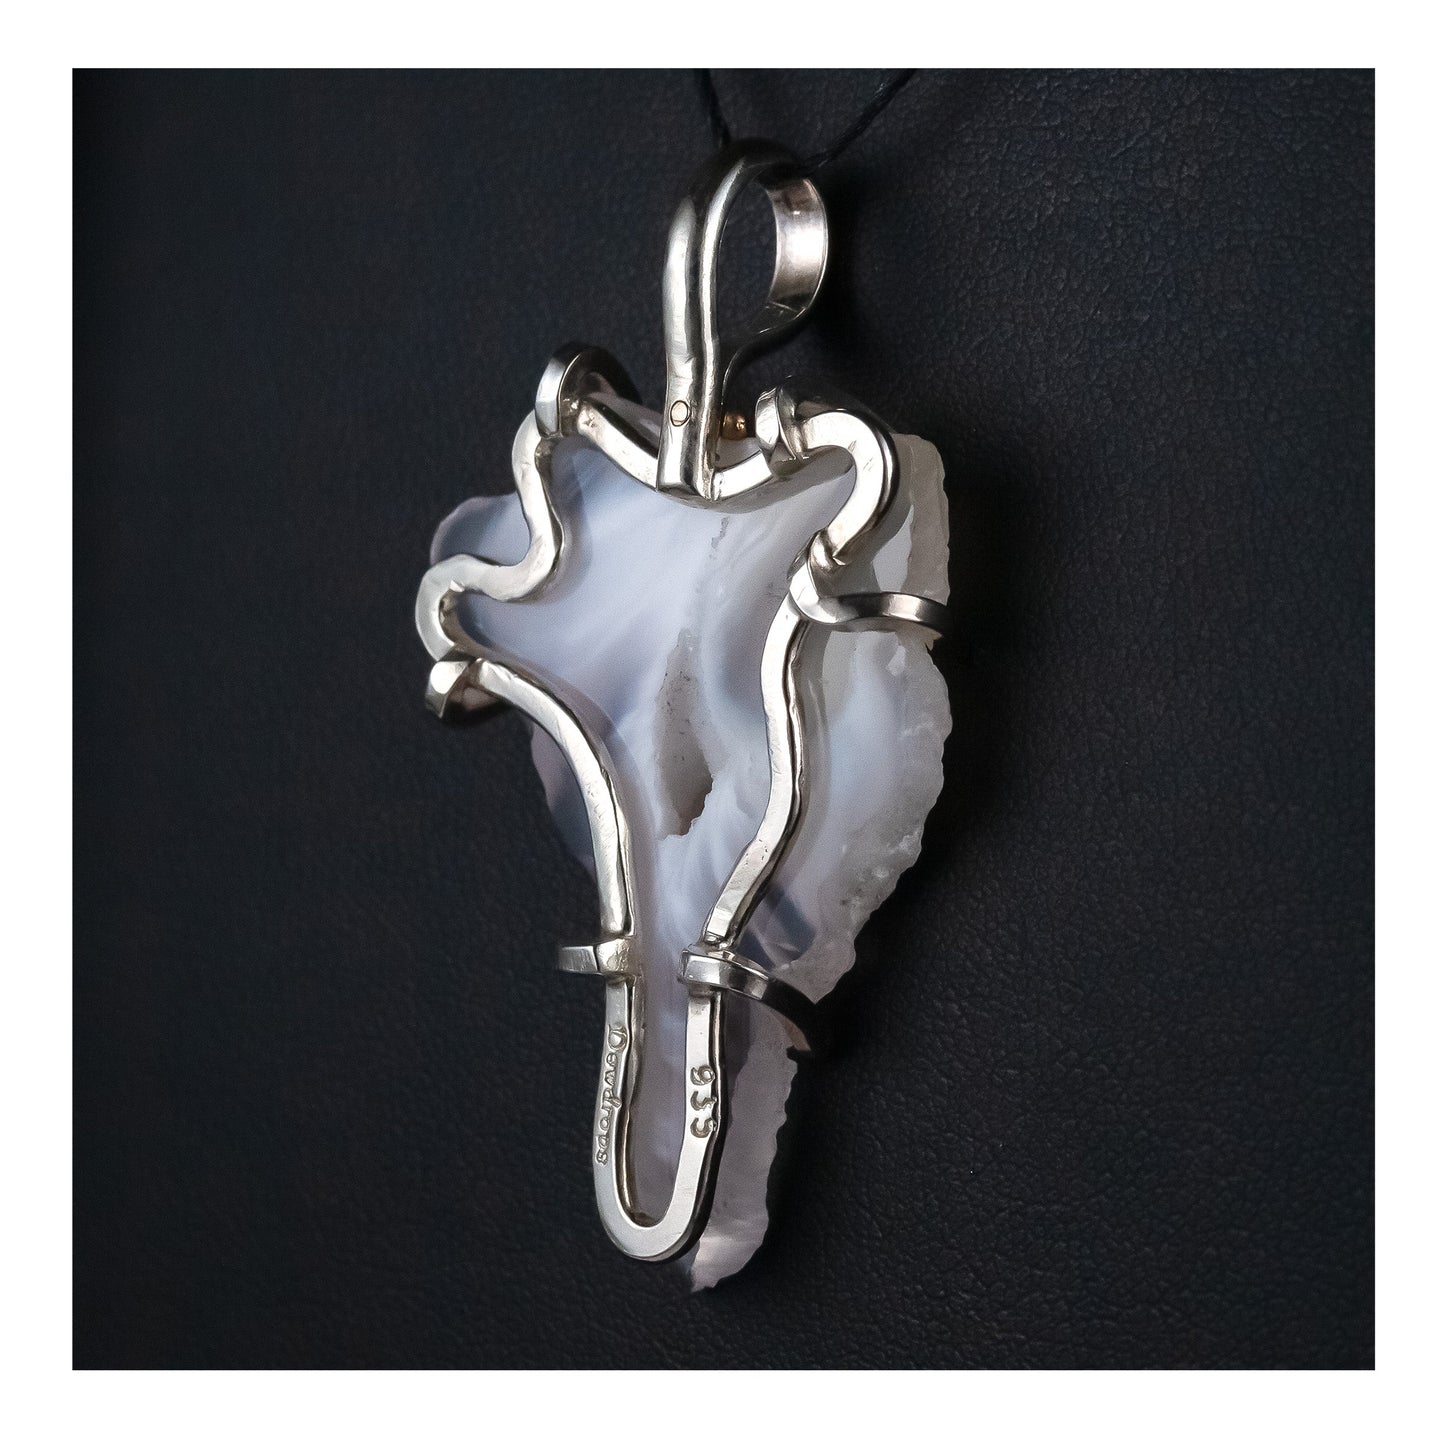 A freeform Agate slice. Tarnish-resistant Argentium Silver. Pendant with Prong setting. Black cord. agate stone necklace.